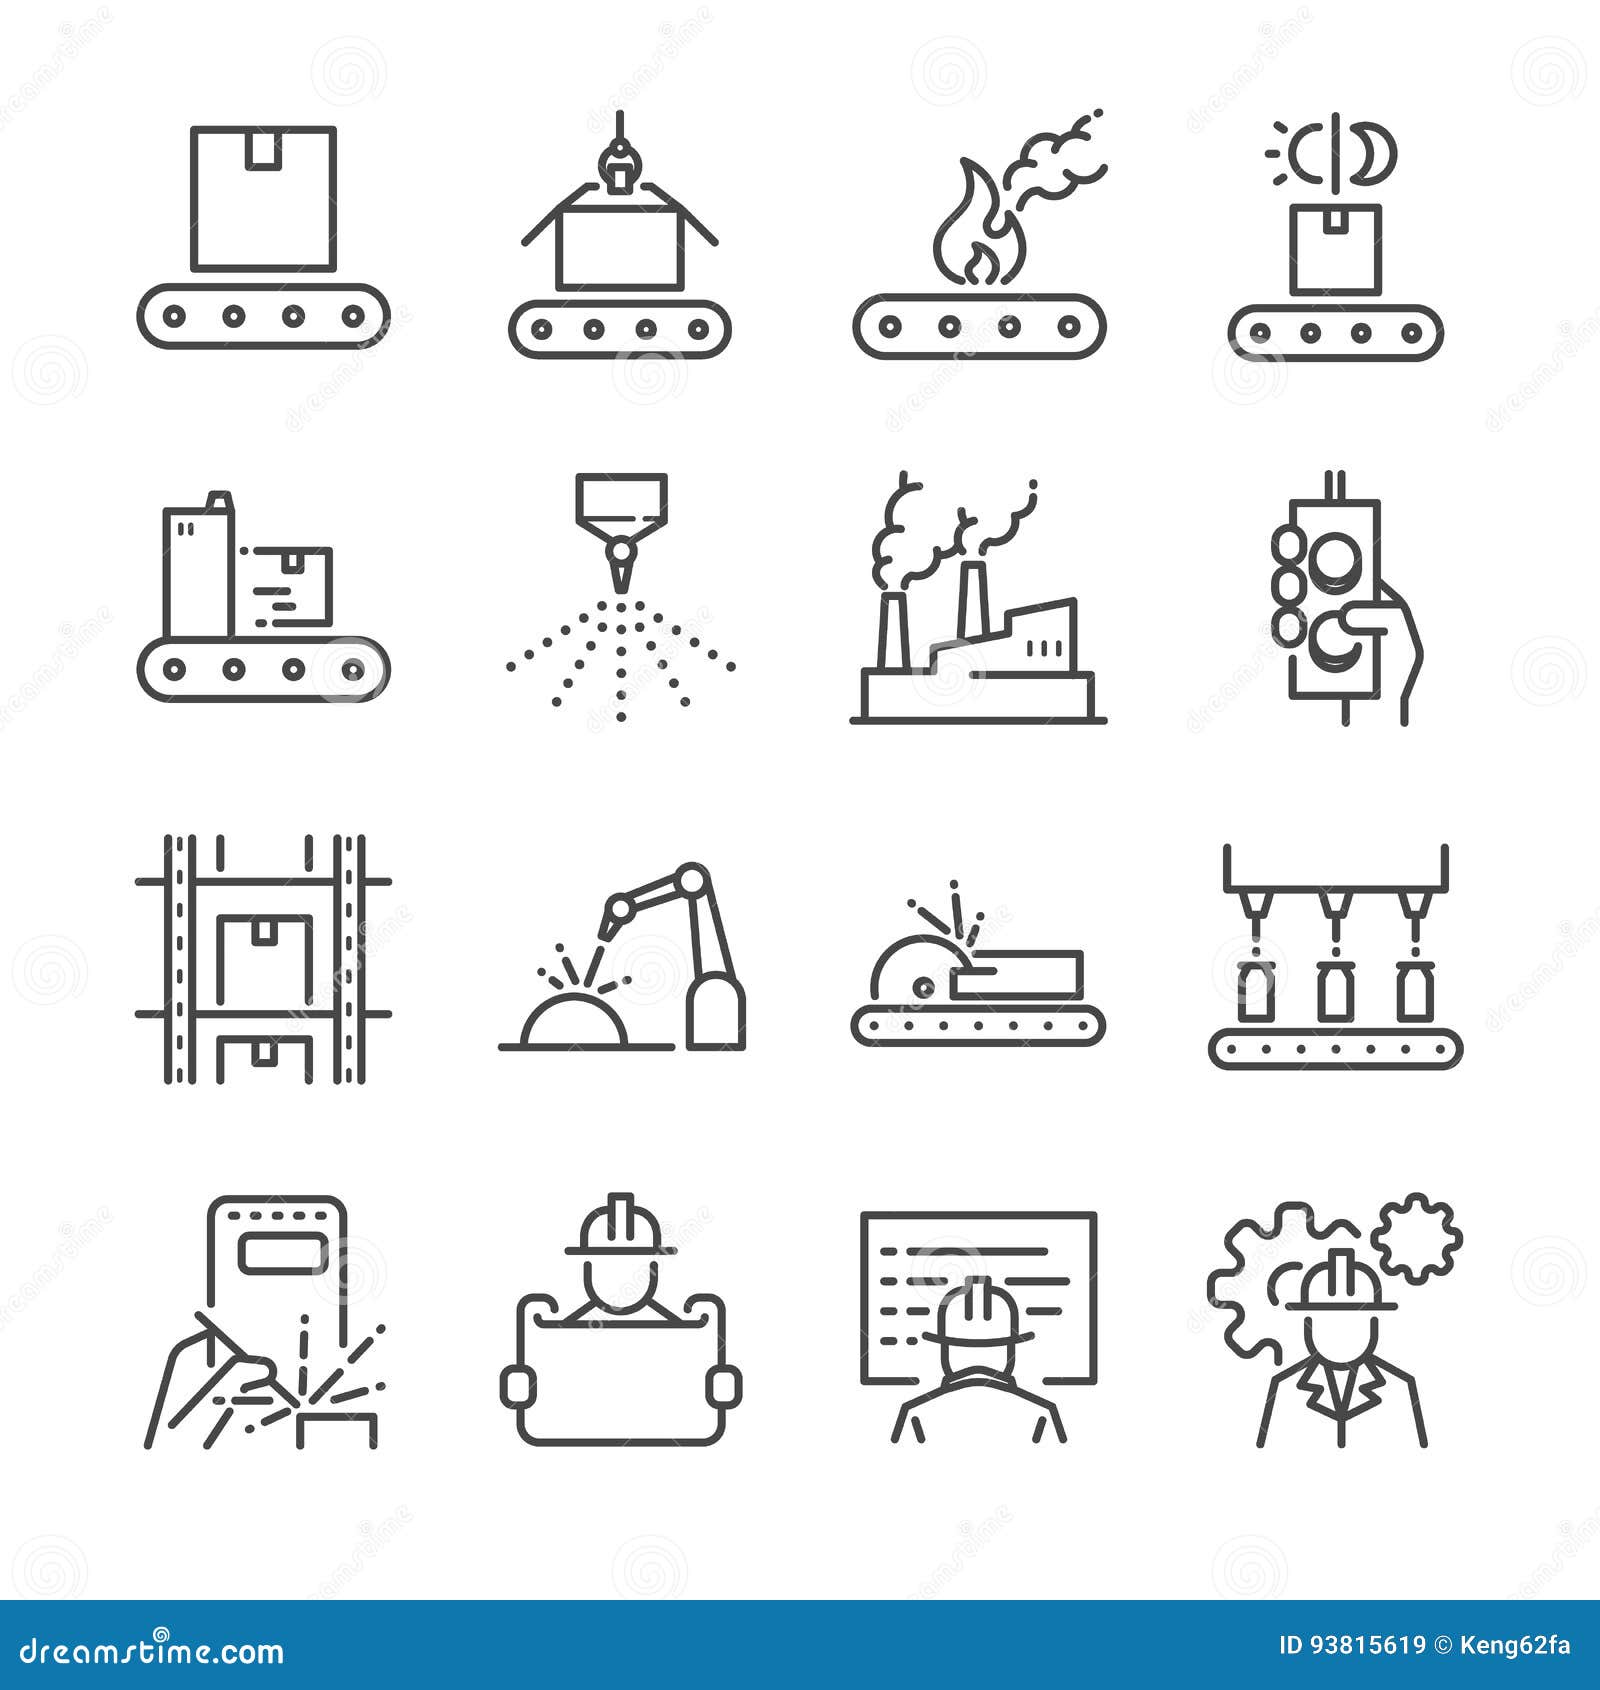 manufacturing line icon set. included the icons as process, production, factory, packing and more.